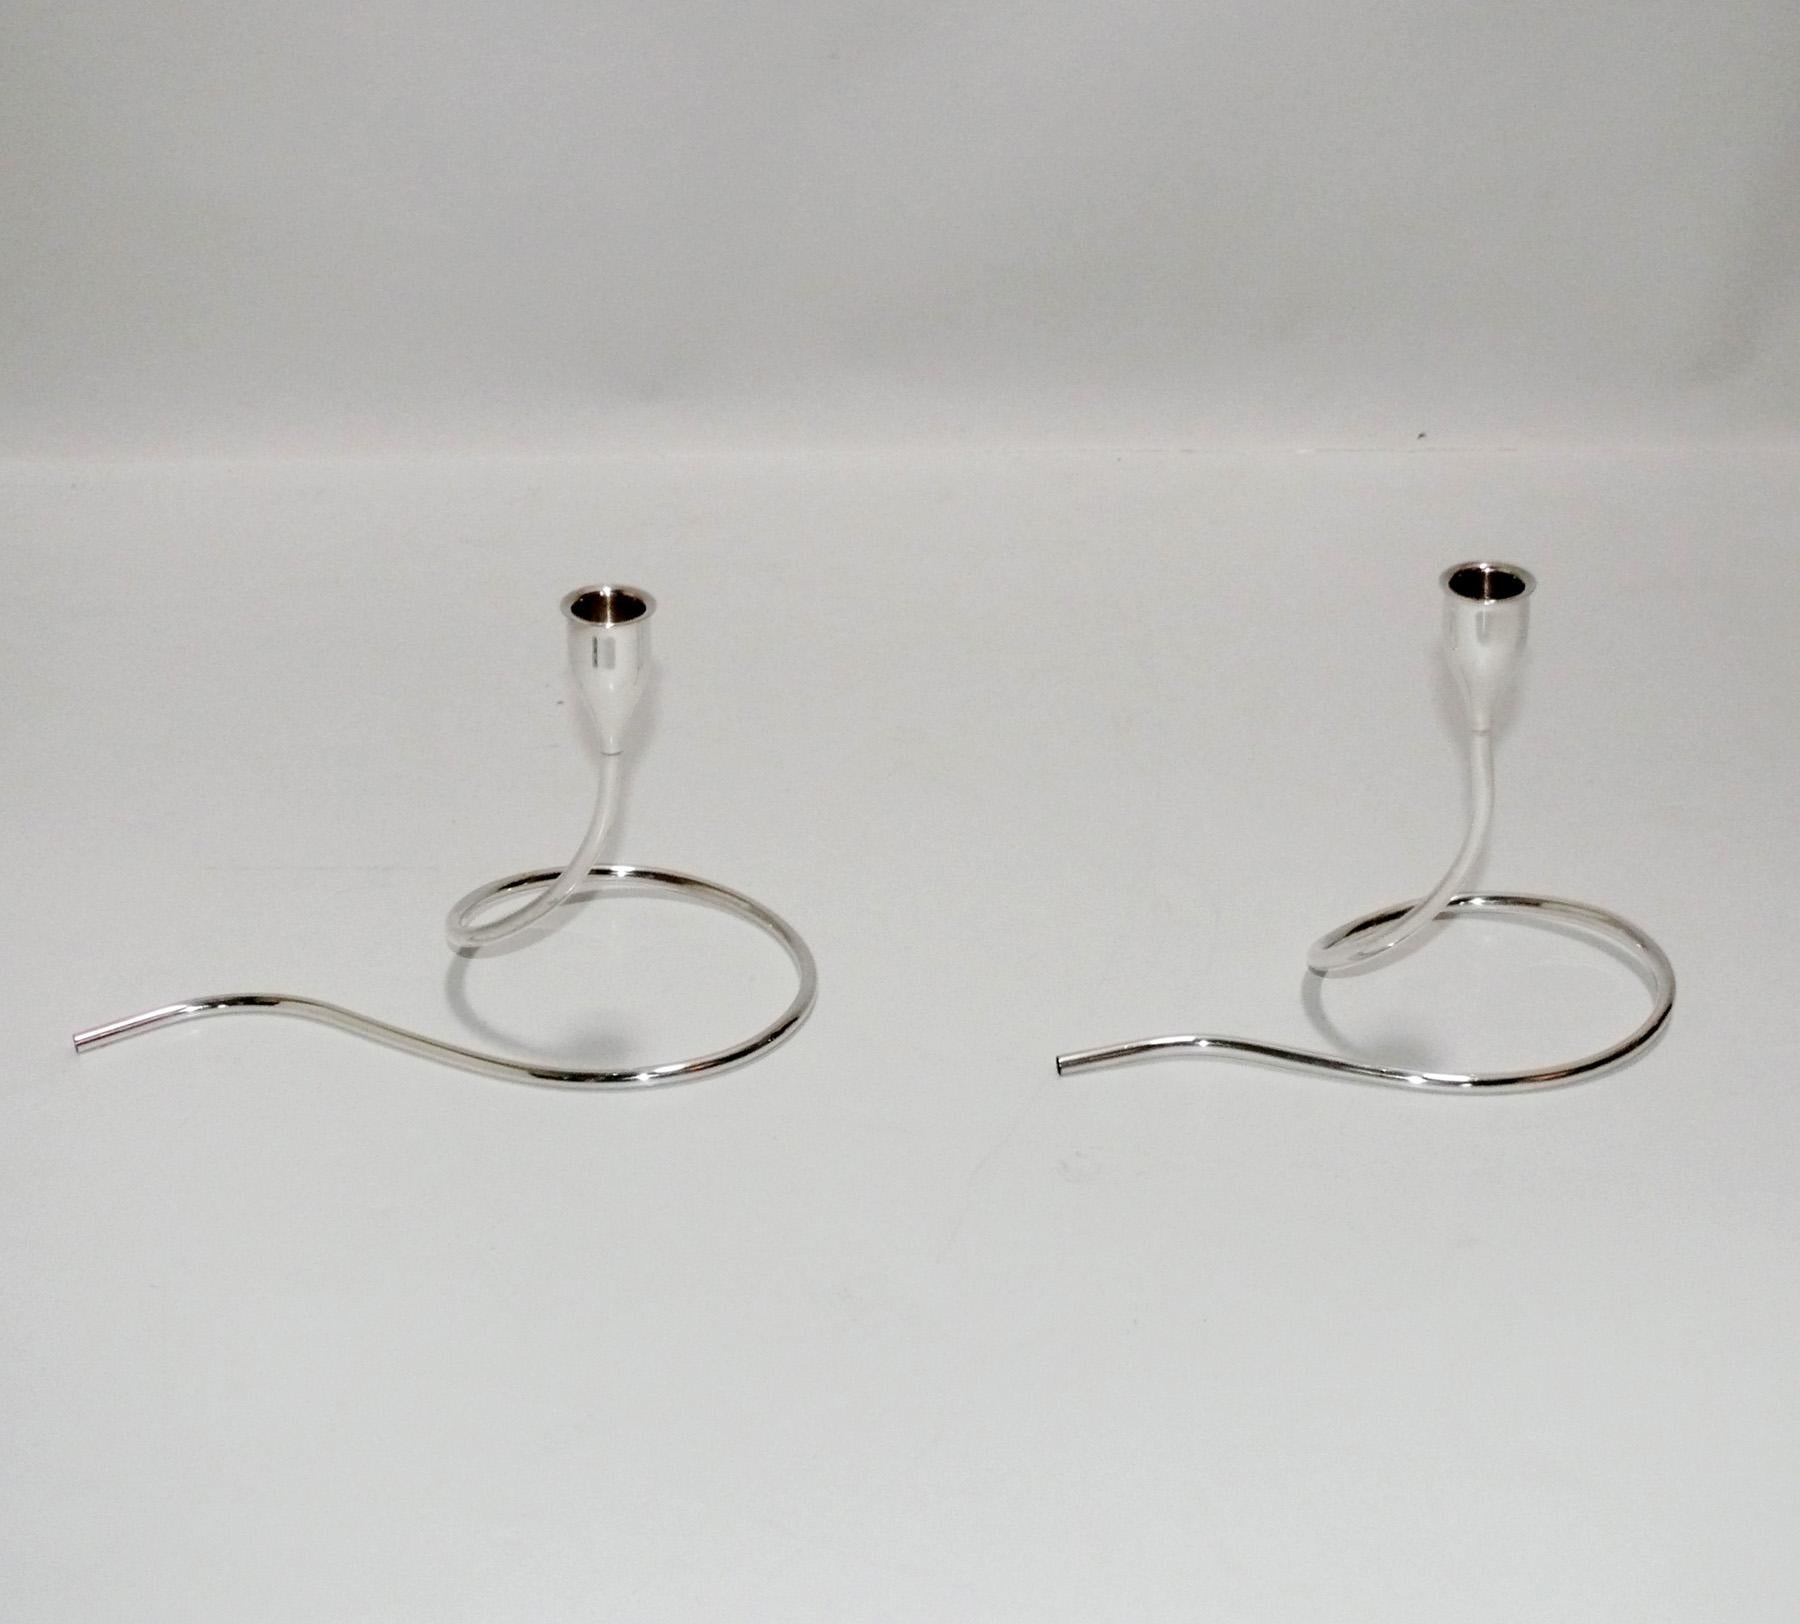 Pair of Sterling Silver Modernist candlesticks, designed by Marion Anderson Noyes for Towle Silversmiths, circa 1950s. Signed inside candle cup 